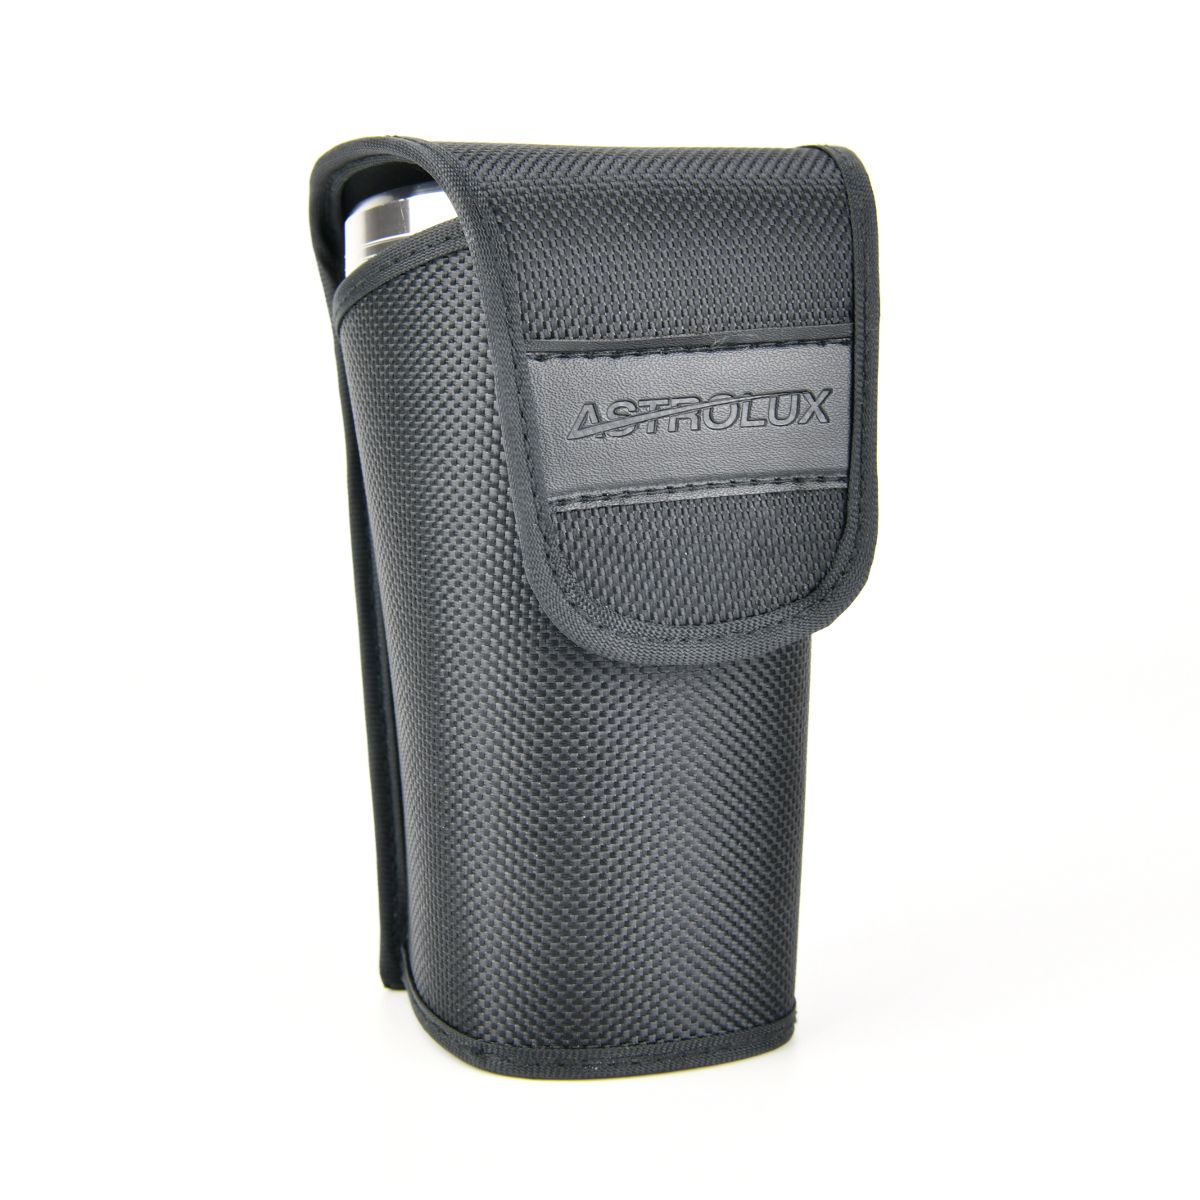 Astrolux-Flashlight-Holster-For-Astrolux-MF01S-Astrolux-MF01-Flashlight-Protected-Bag-Waist-Bag-1544876